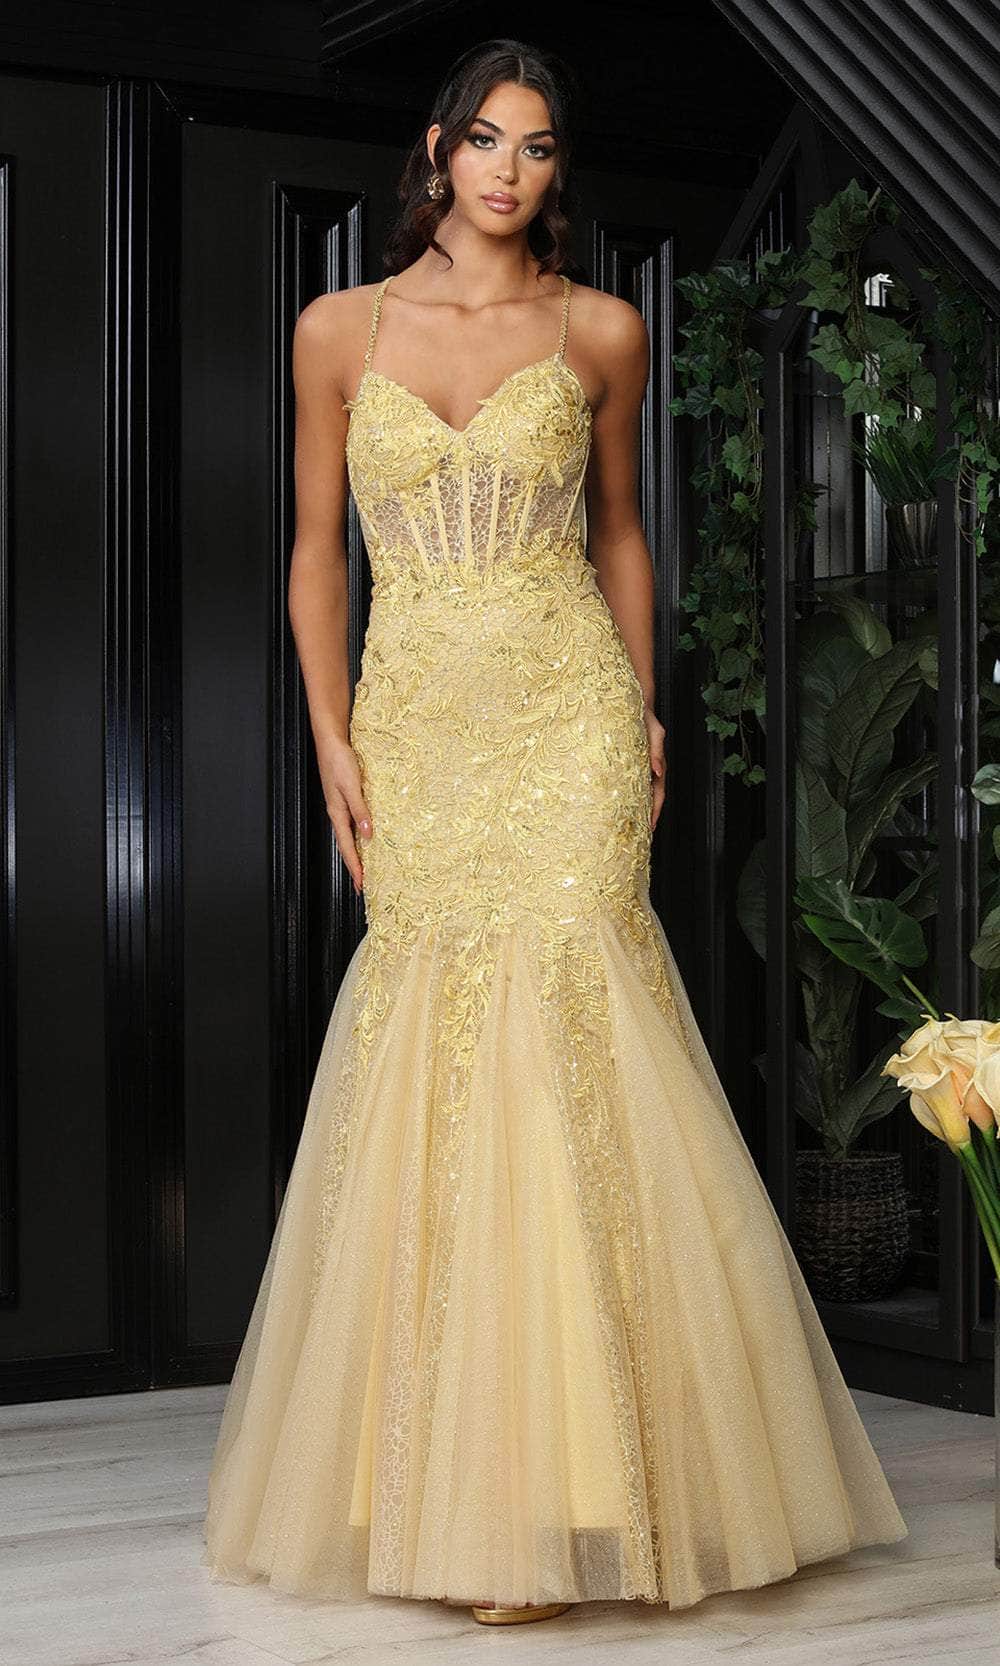 May Queen RQ8059 - Embroidered Godets Prom Gown Prom Dresses 4 / Gold